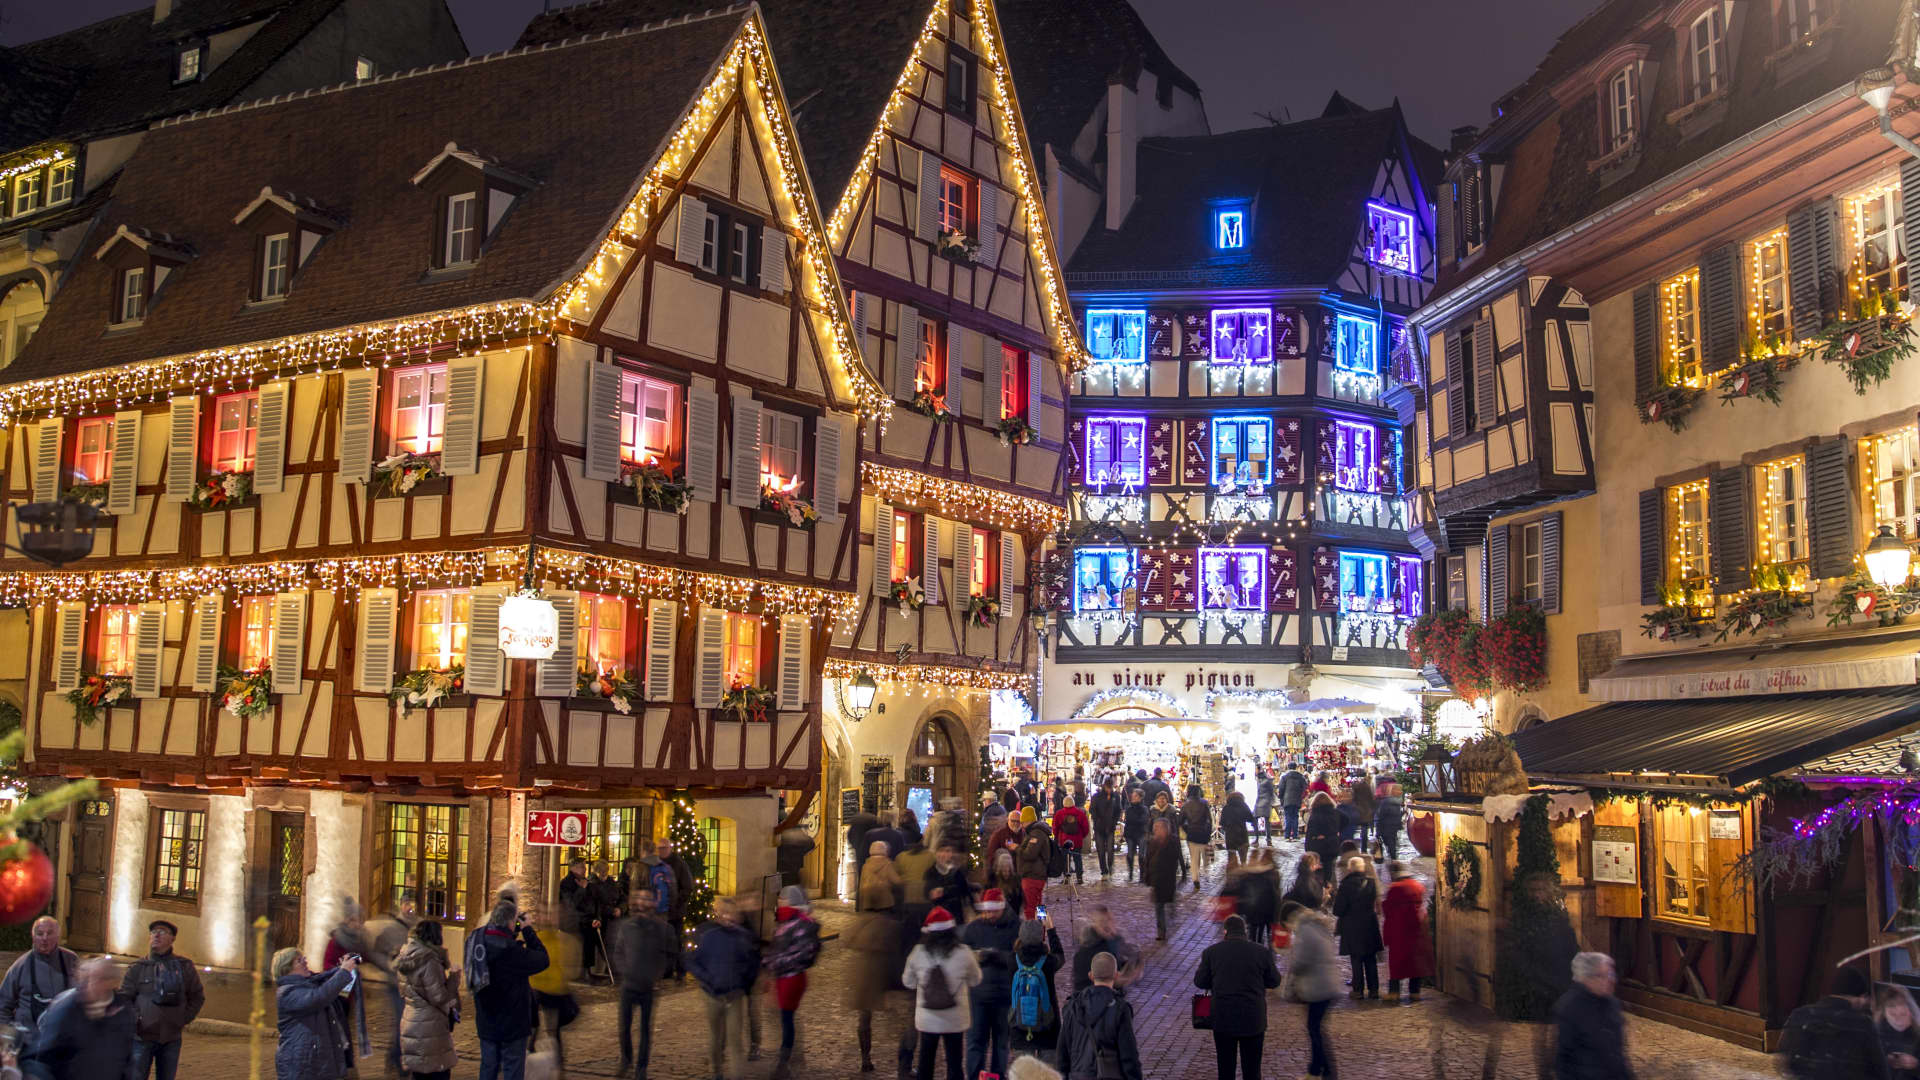 Half-timbered houses in Colmar adorned with Christmas lights during the holiday season.